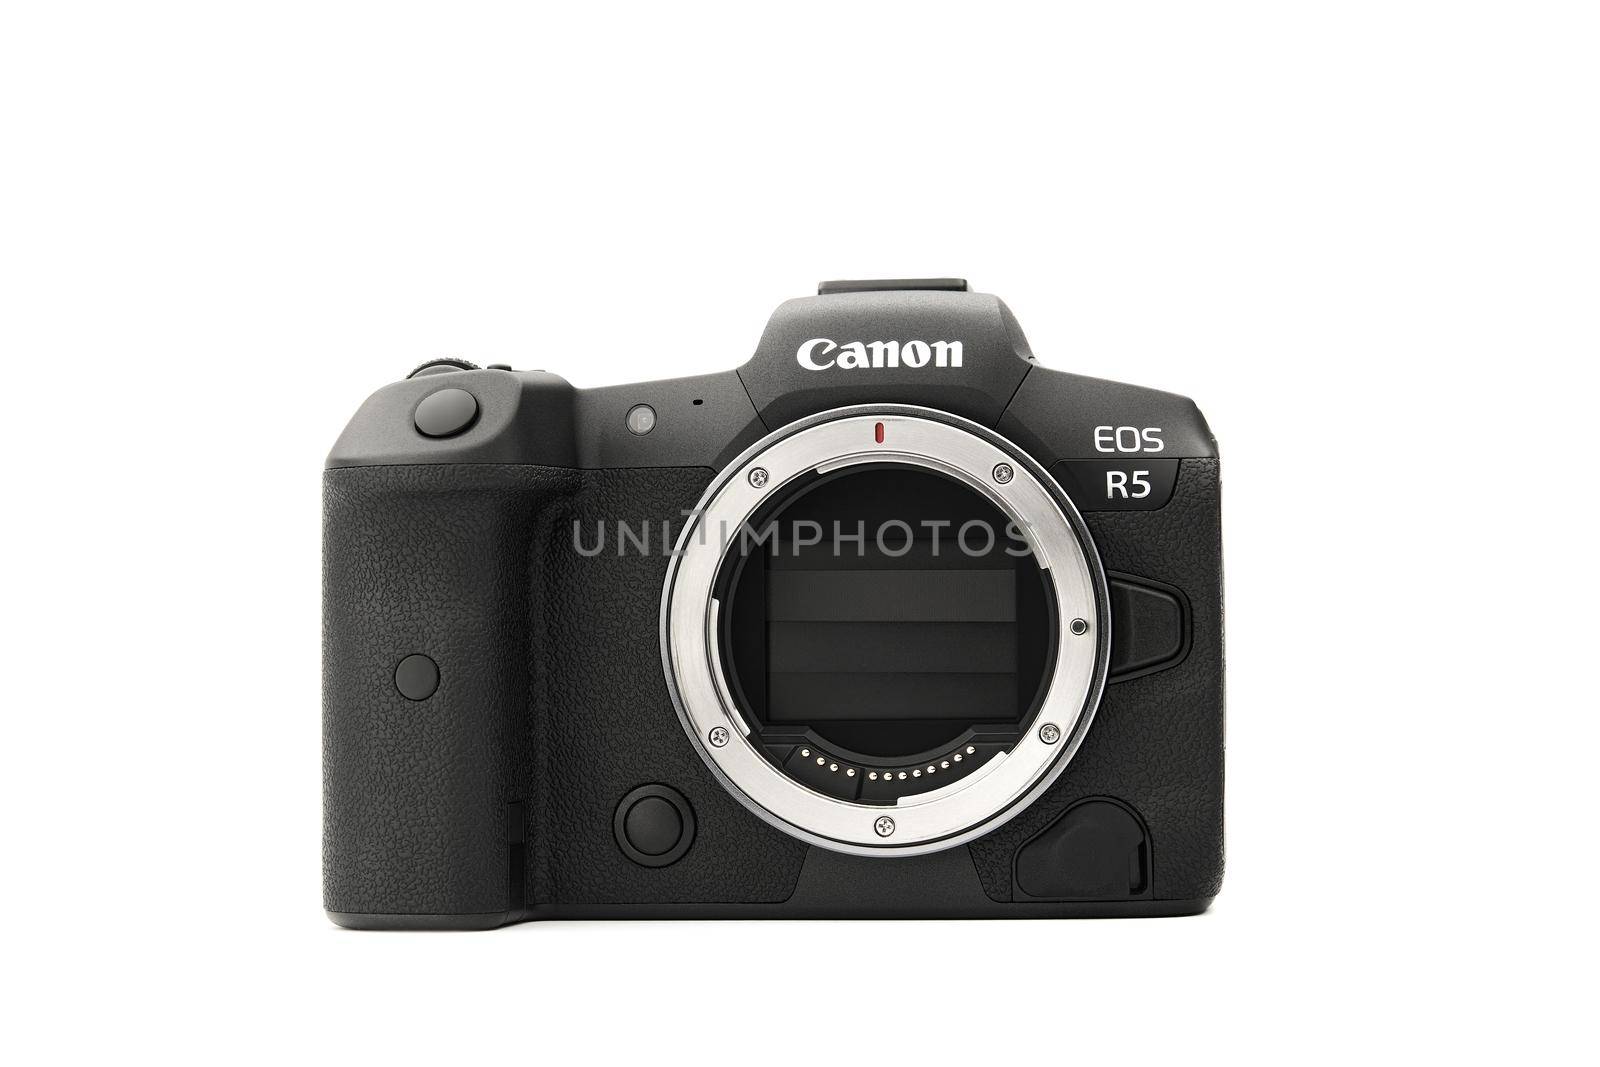 Canon EOS R5 Mirrorless Digital Camera with 8k raw video on a white background. One of the most powerful mirrorless cameras on the market. 03.04.2021, Rostov region, Russia.